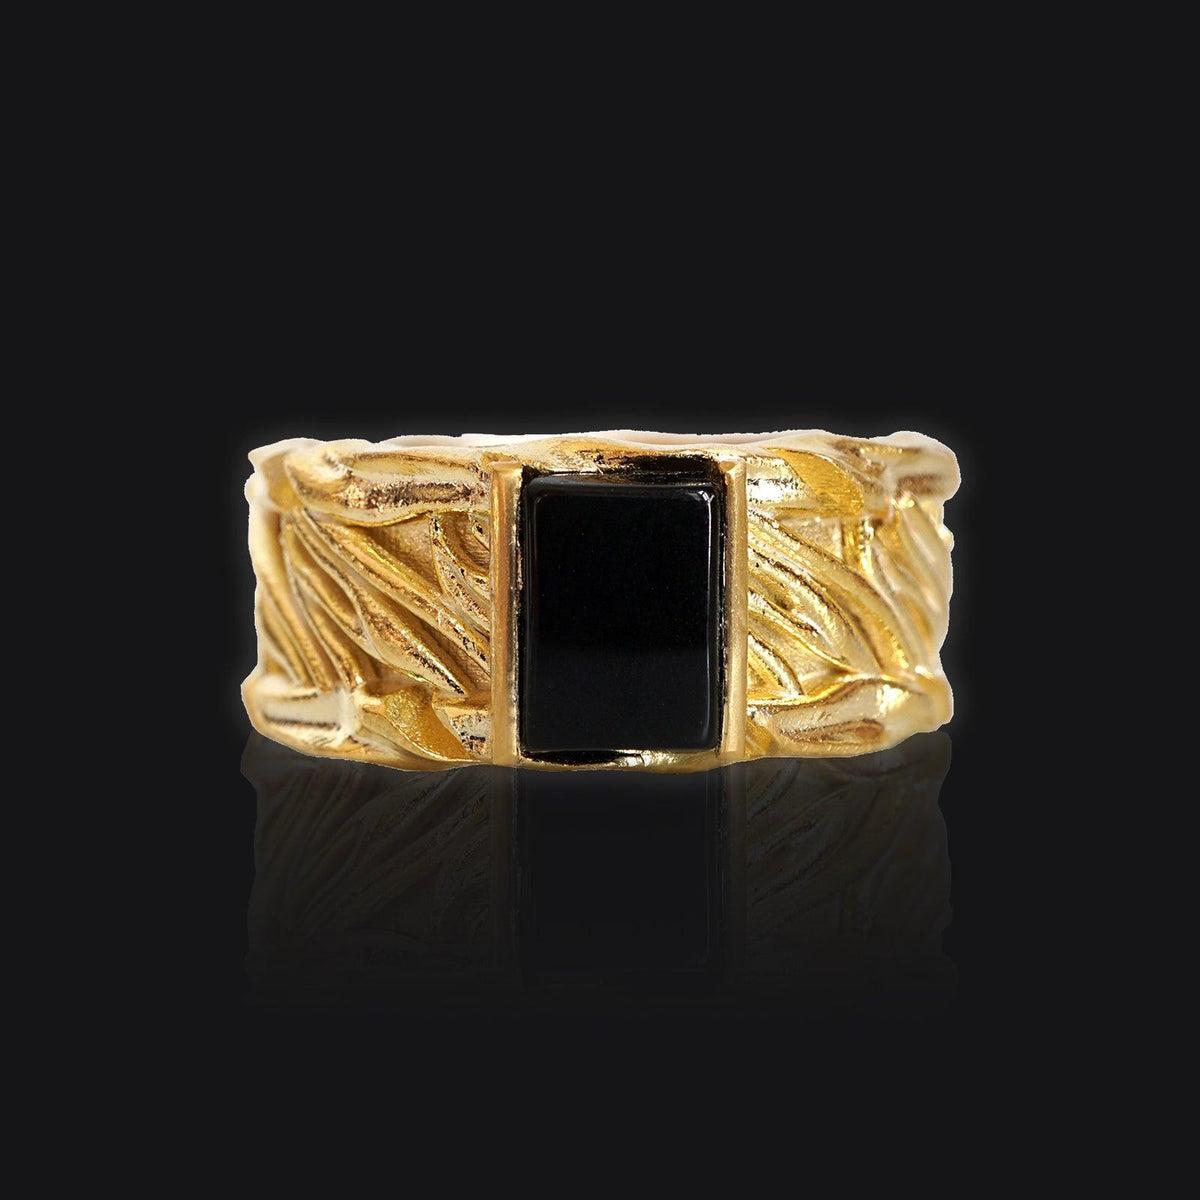 Byzantine Onyx Ring in Sterling Silver and 14K Gold, 9.8mm